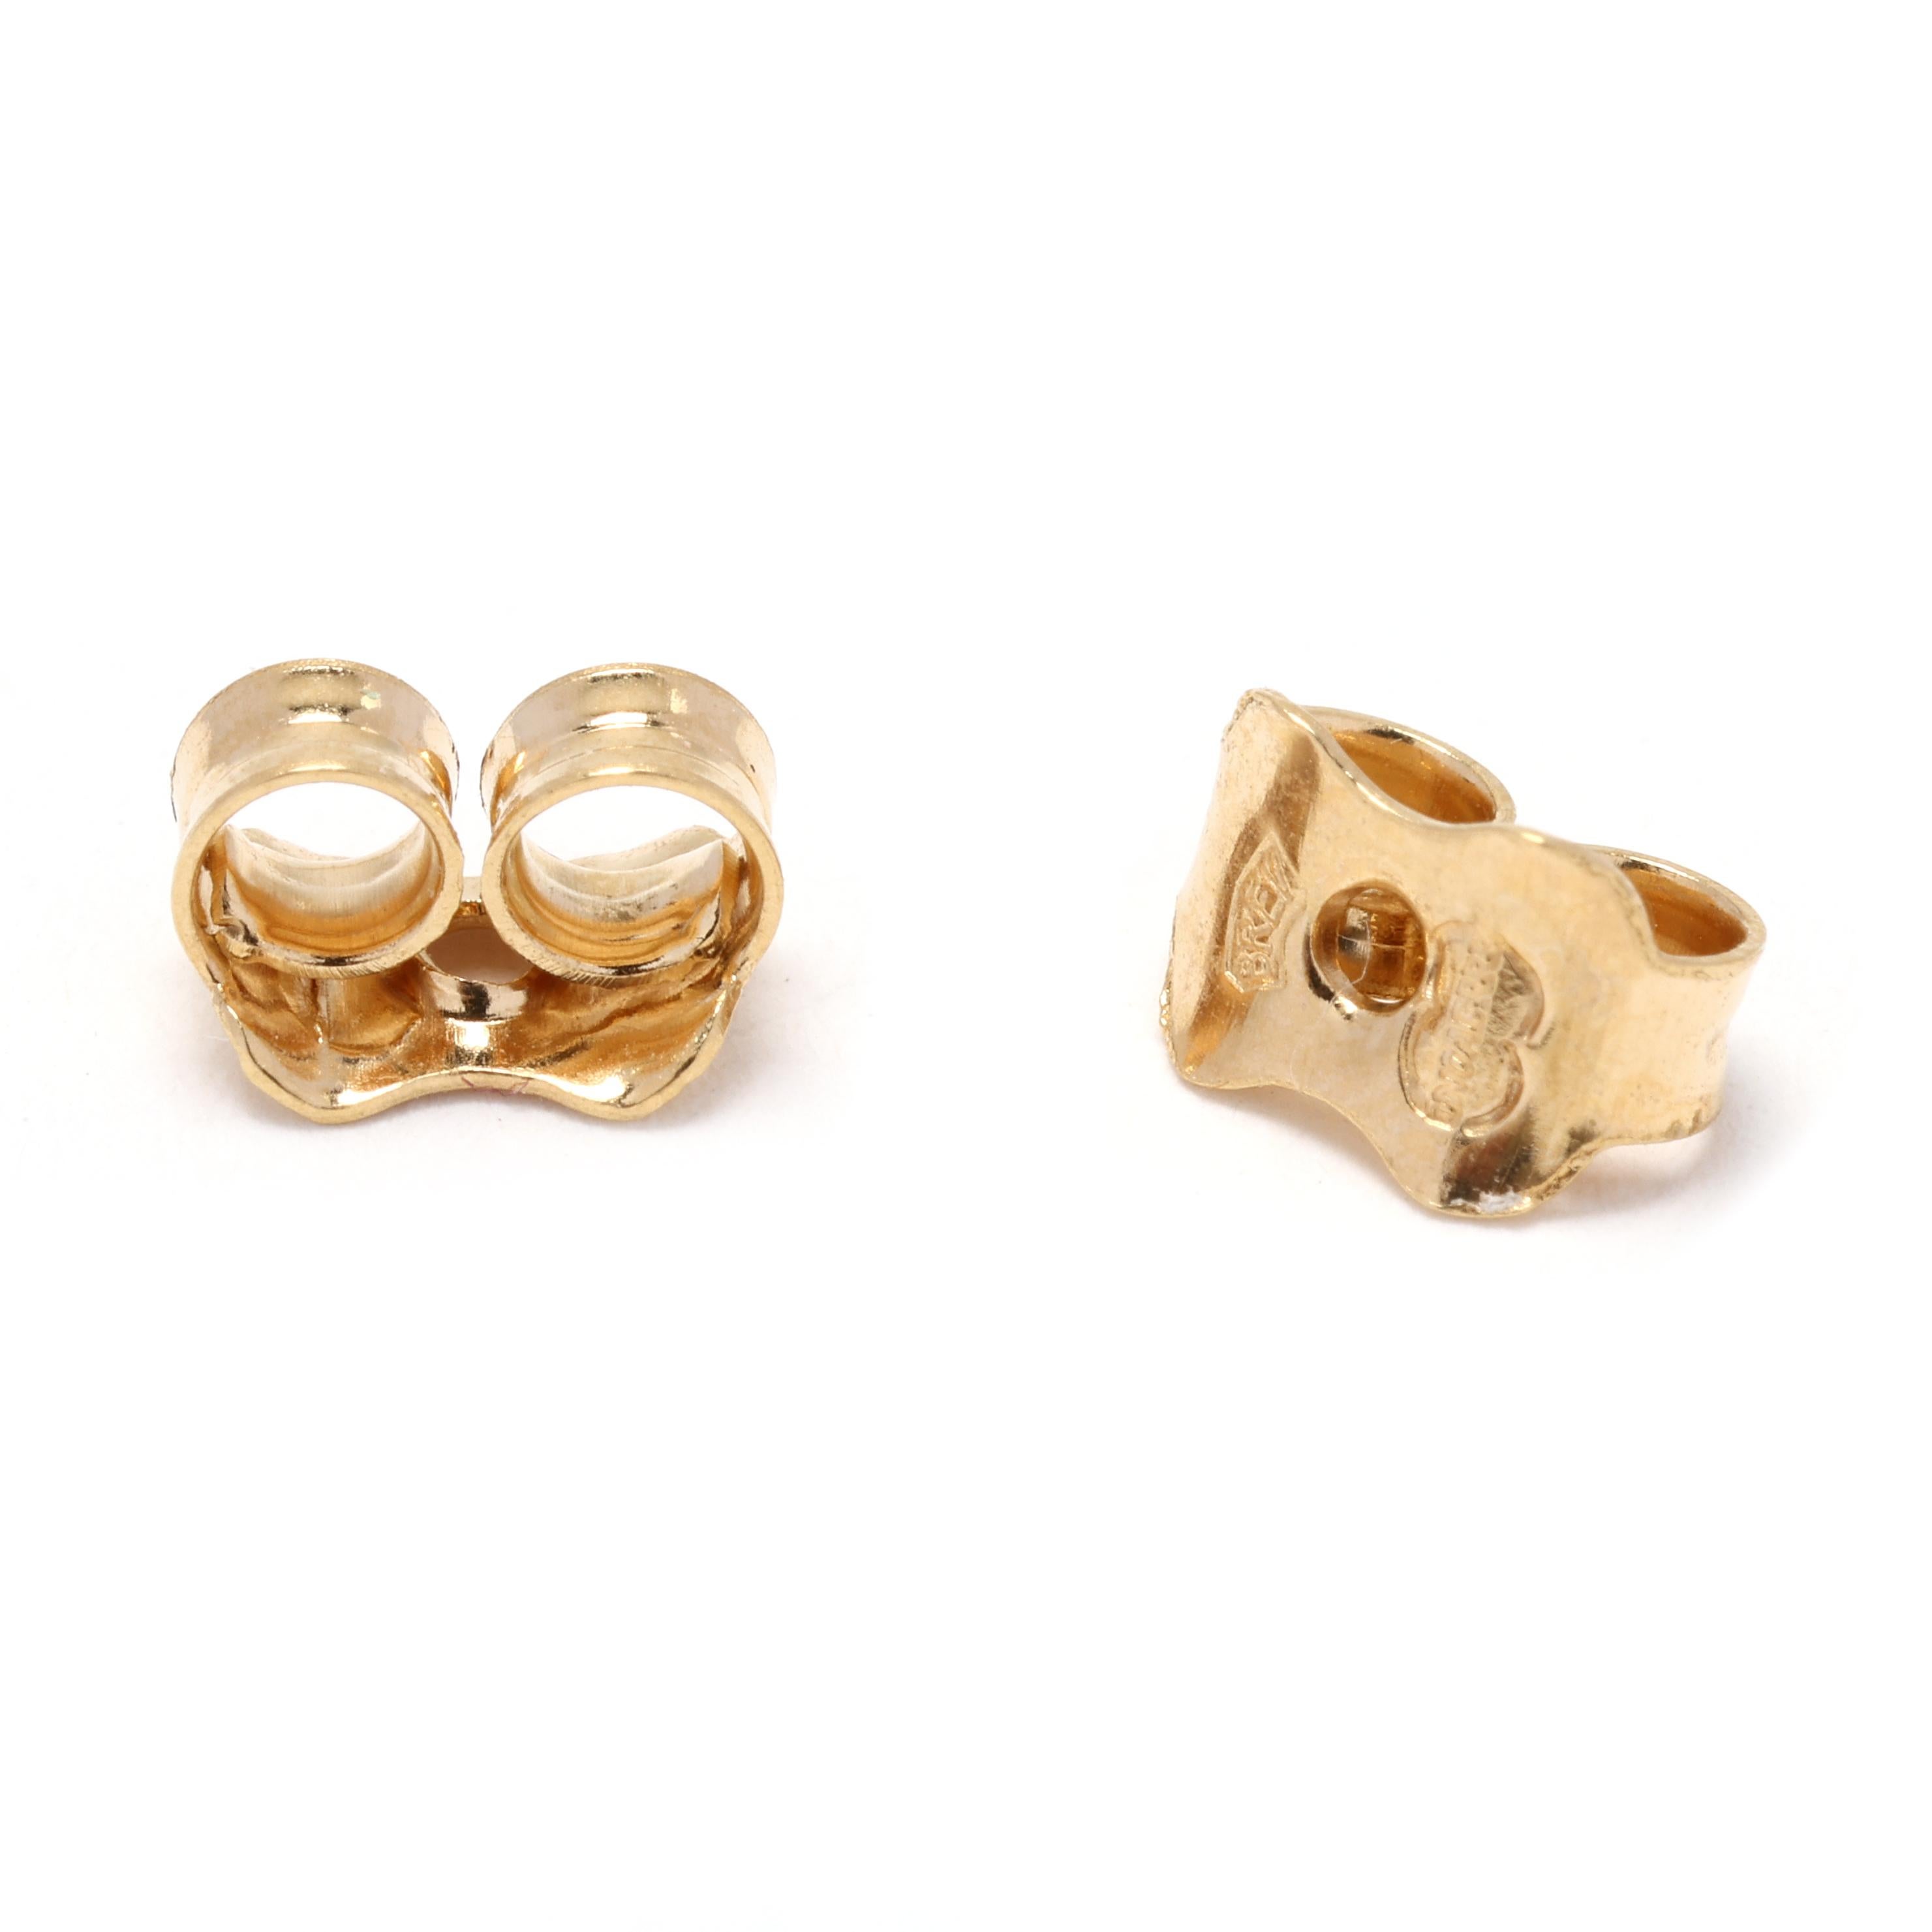 Women's or Men's James Avery Four Seasons Gold Studs, 14k Yellow Gold, Large Round Studs